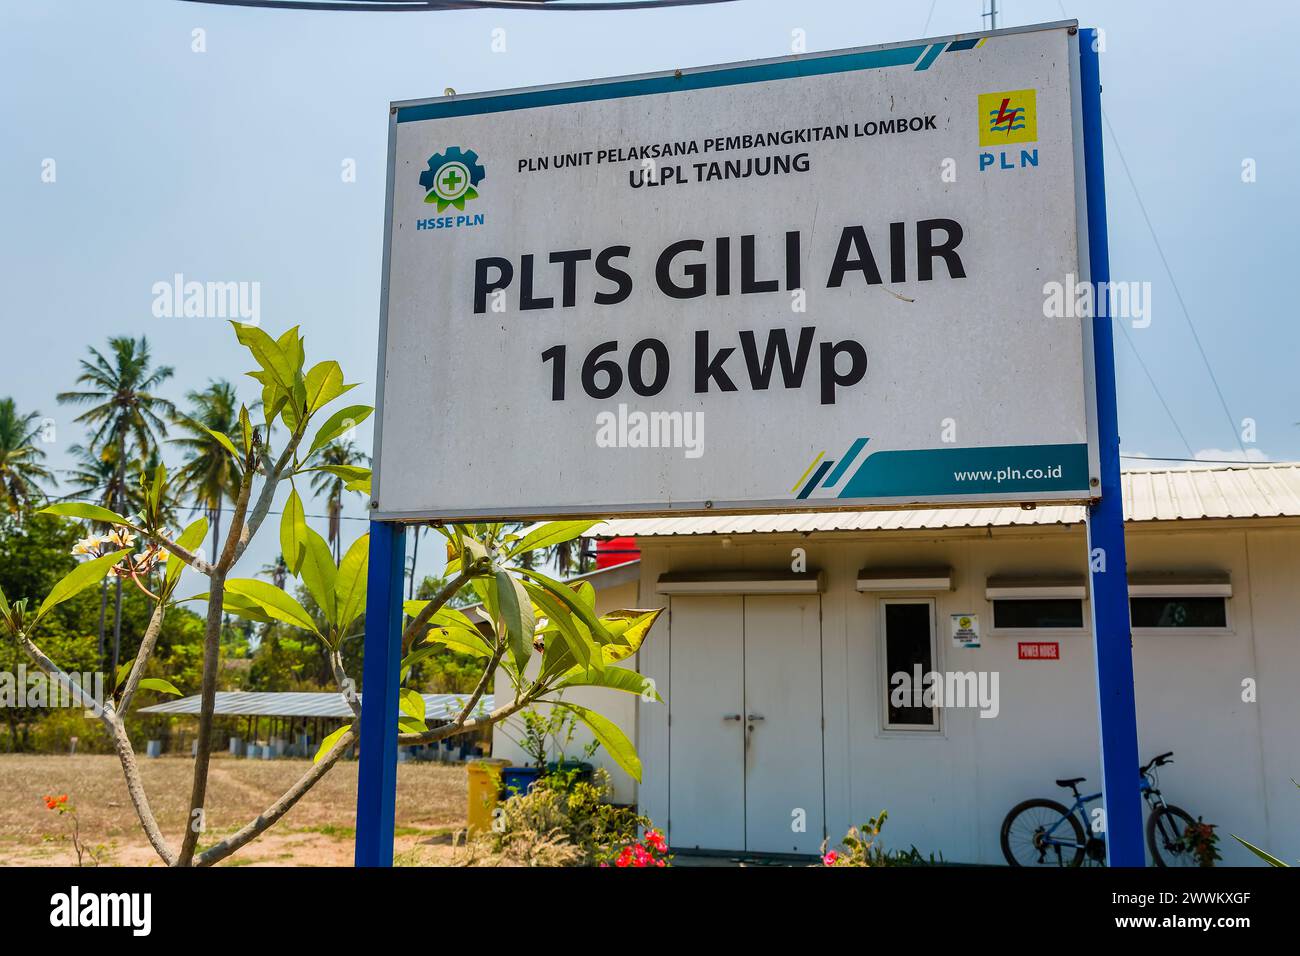 A small solar electricity generating plant on the tiny tropical island of Gili Air off the coast of Lombok, Indonesia Stock Photo